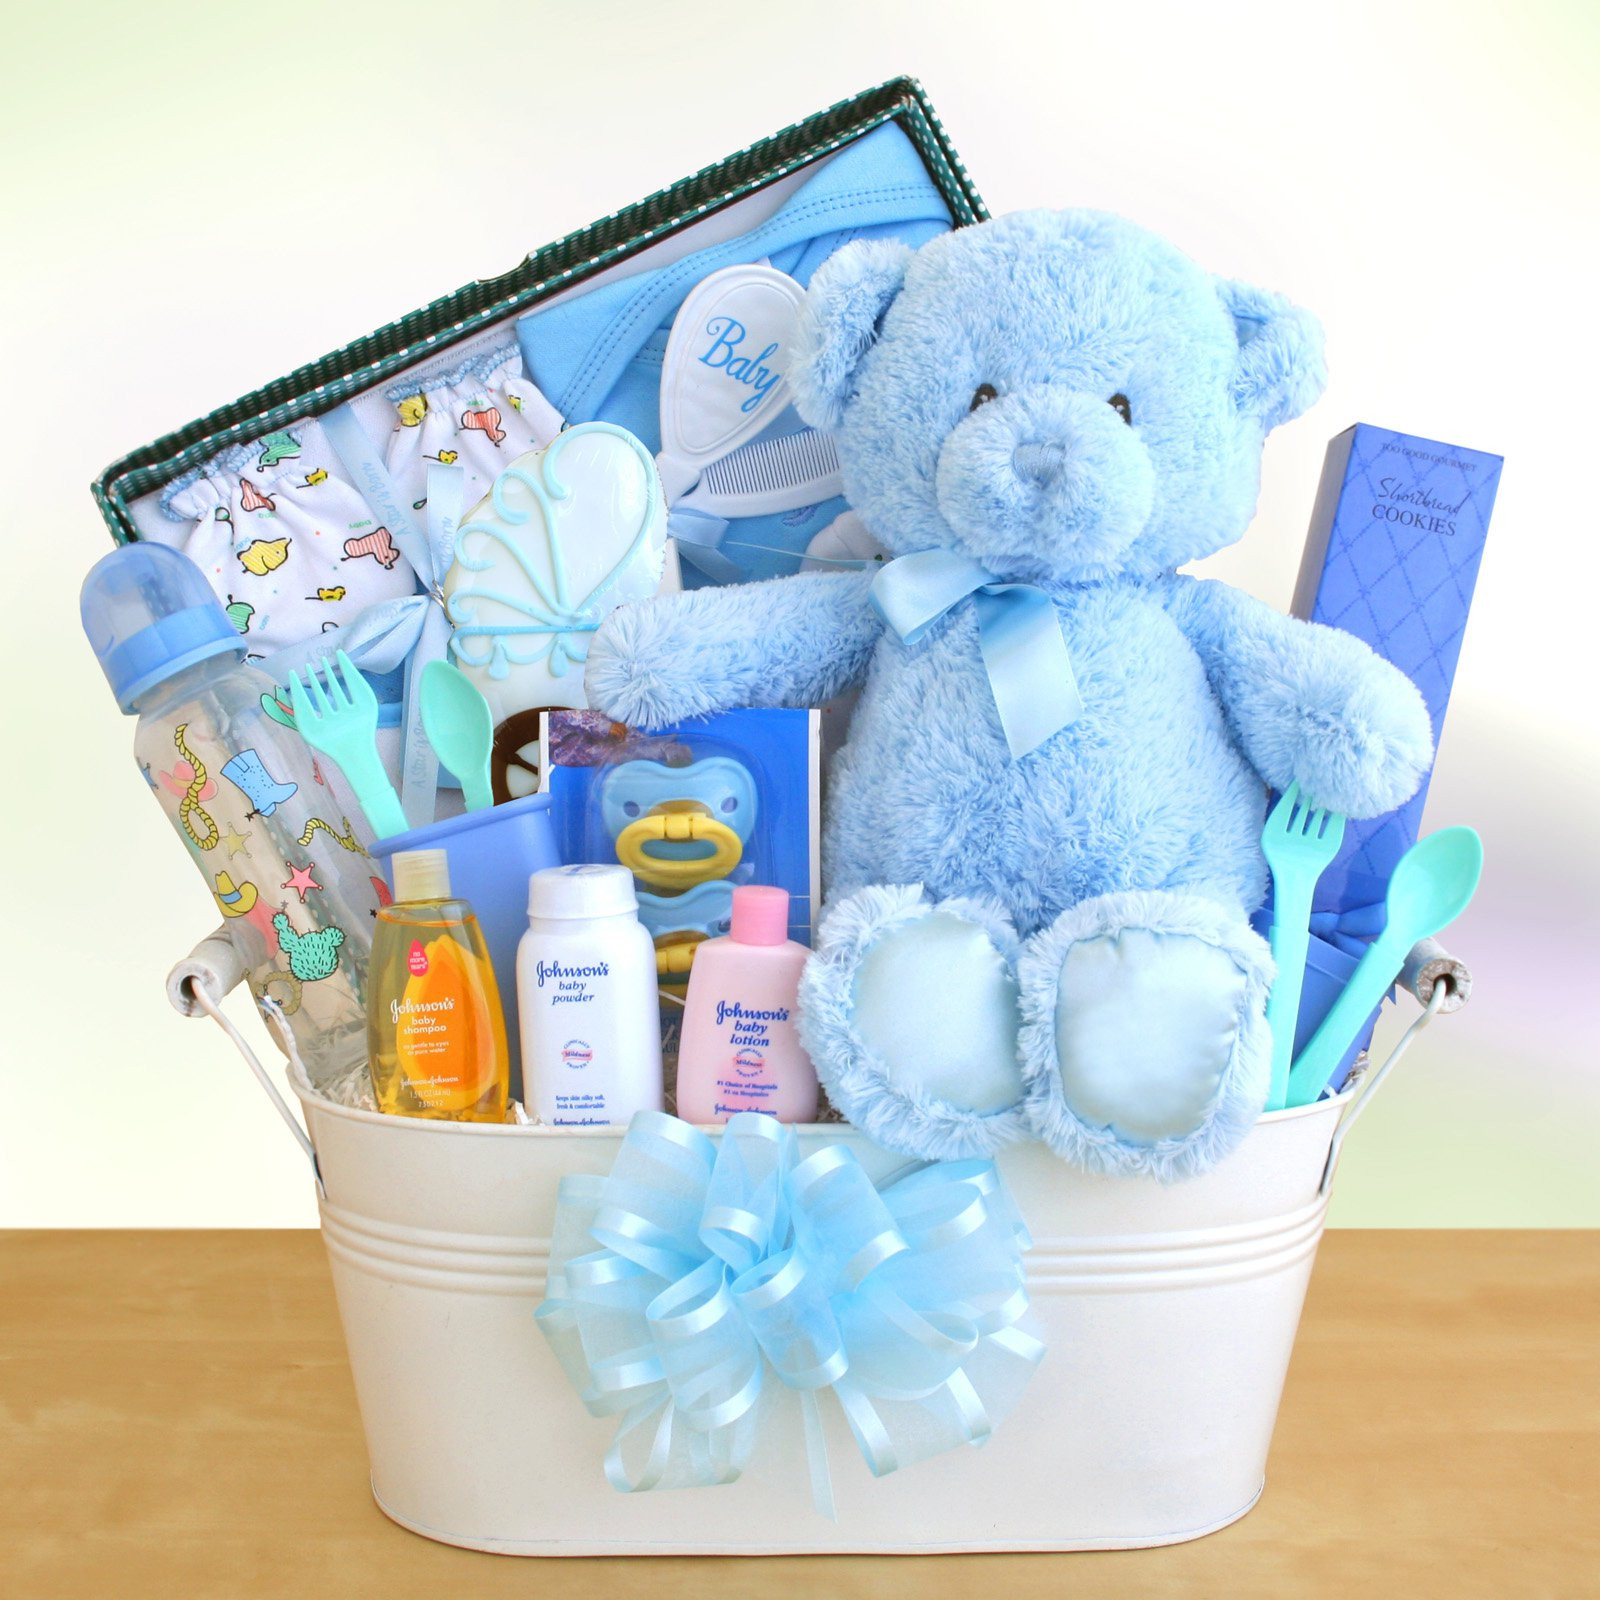 Baby Shower Gift Basket Ideas For Boy
 New Arrival Baby Boy Gift Basket Gift Baskets by